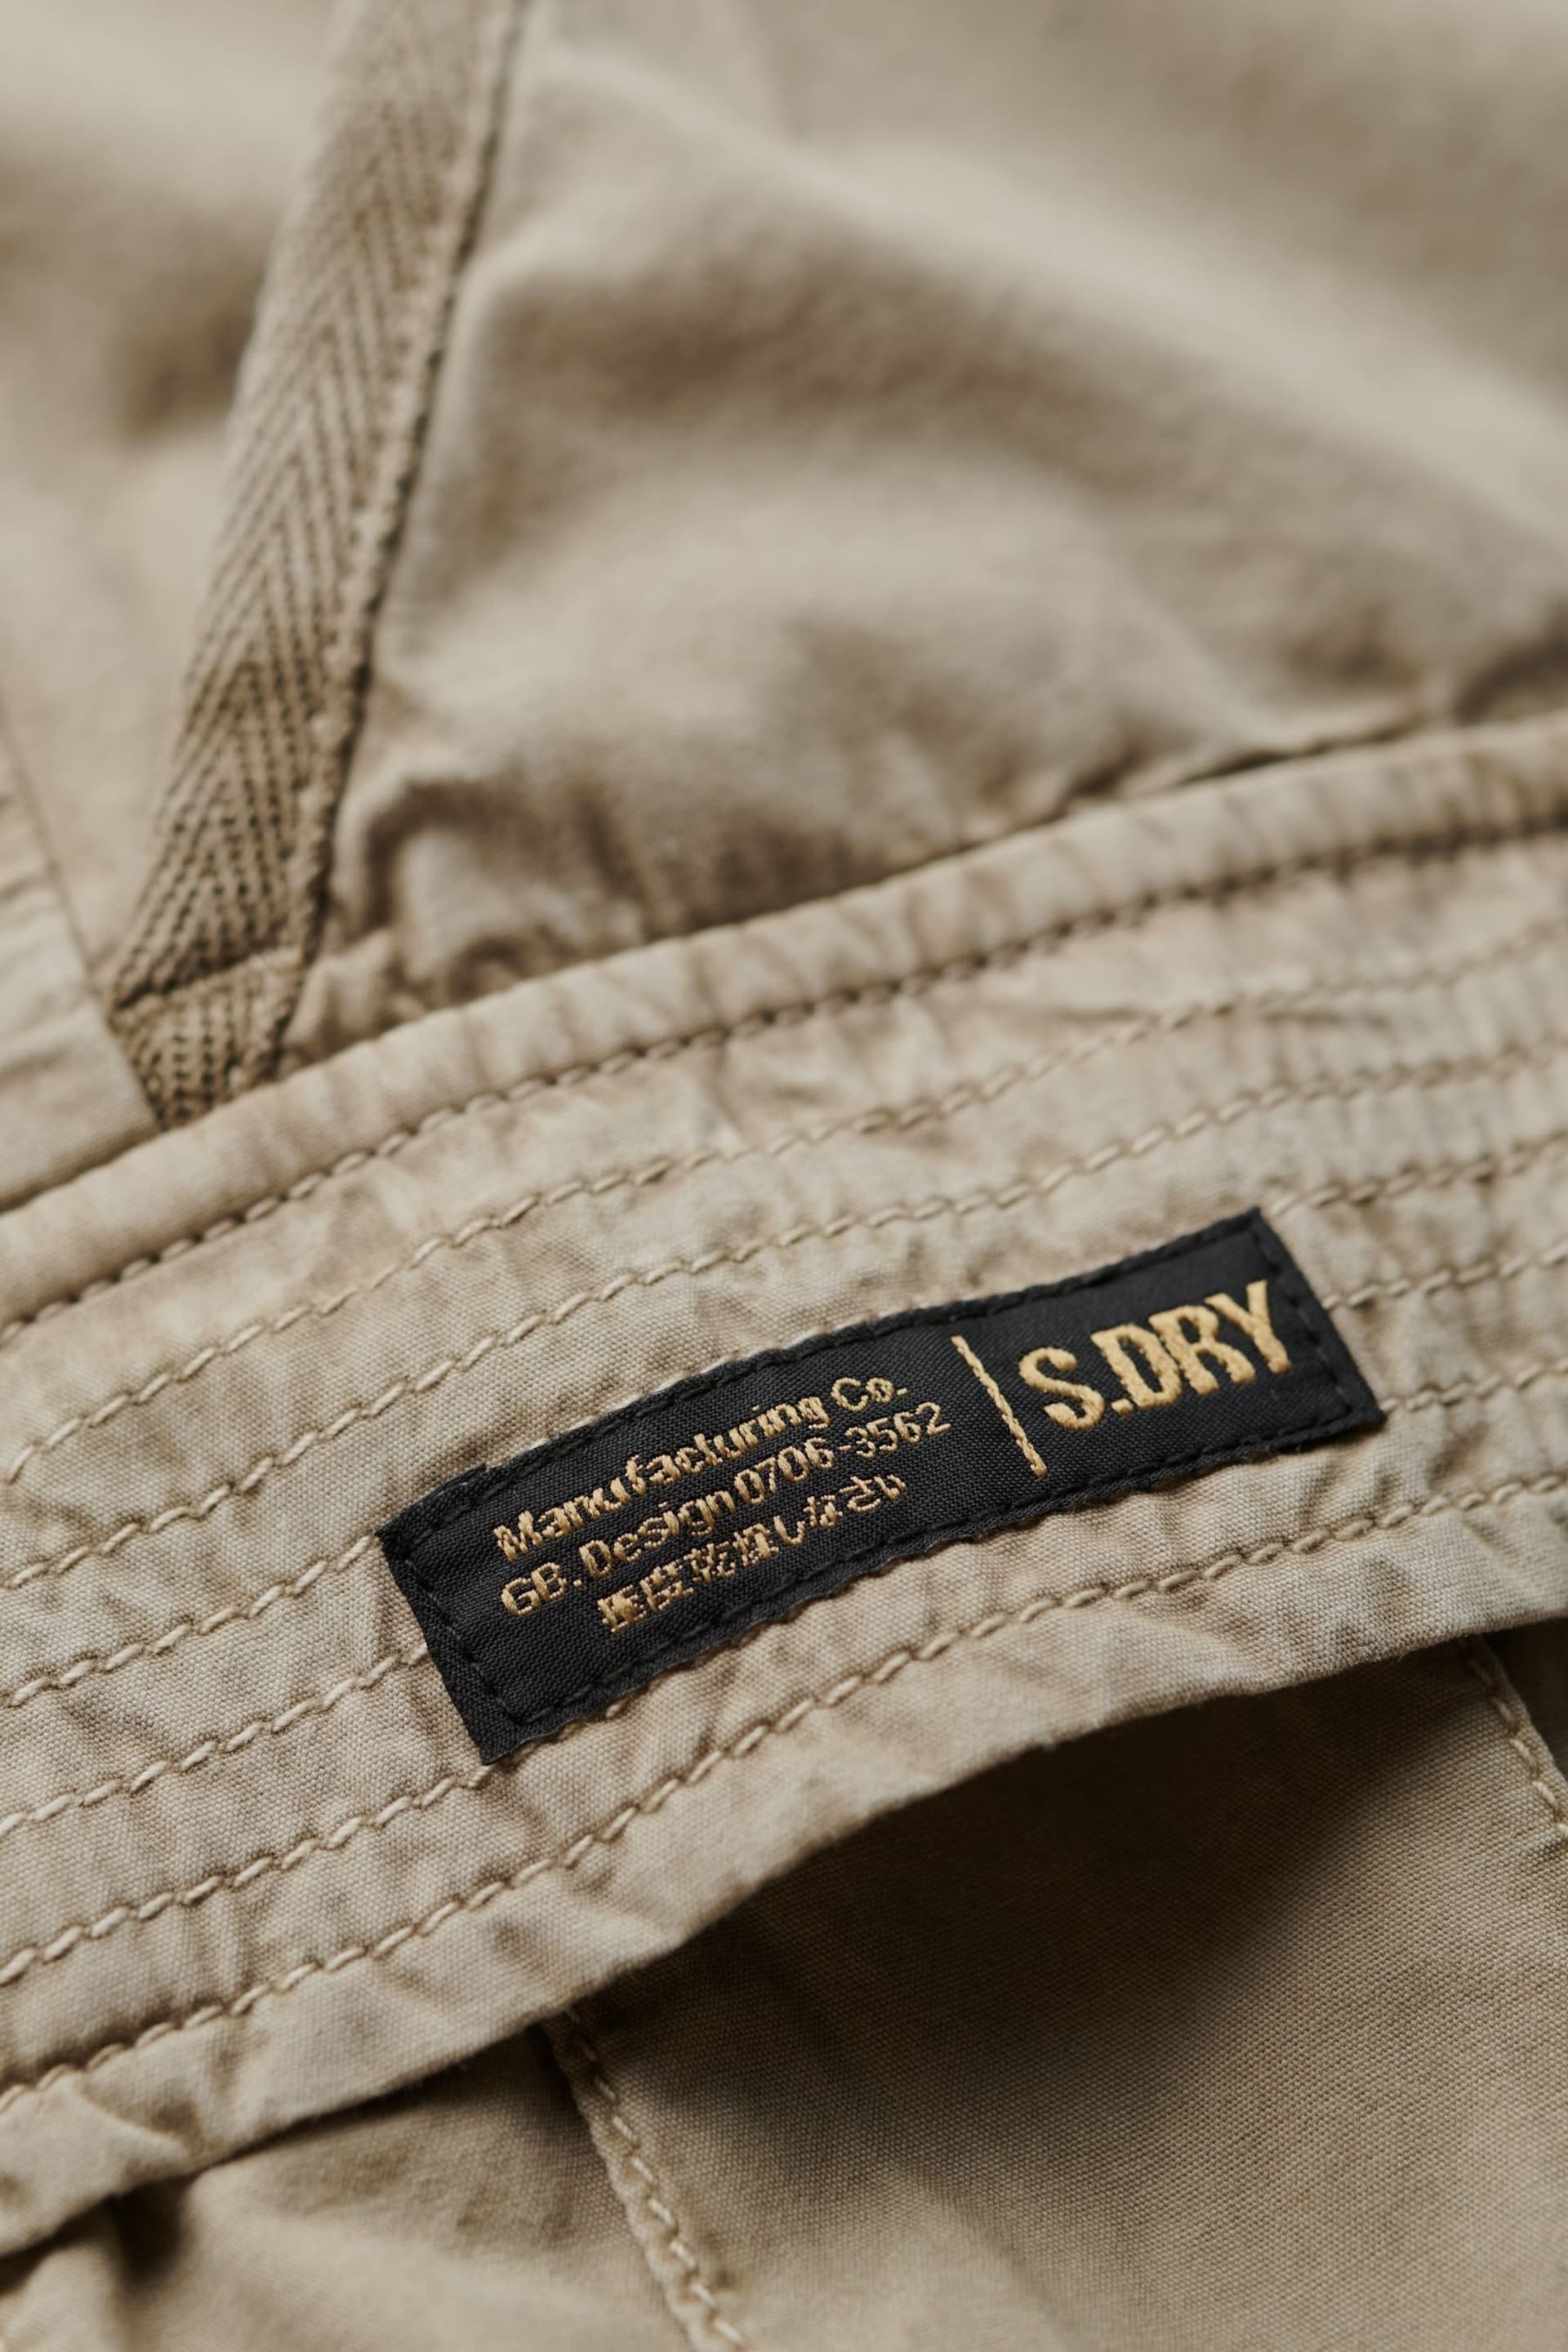 Superdry Brown Utility Parachute Skirt - Image 8 of 9